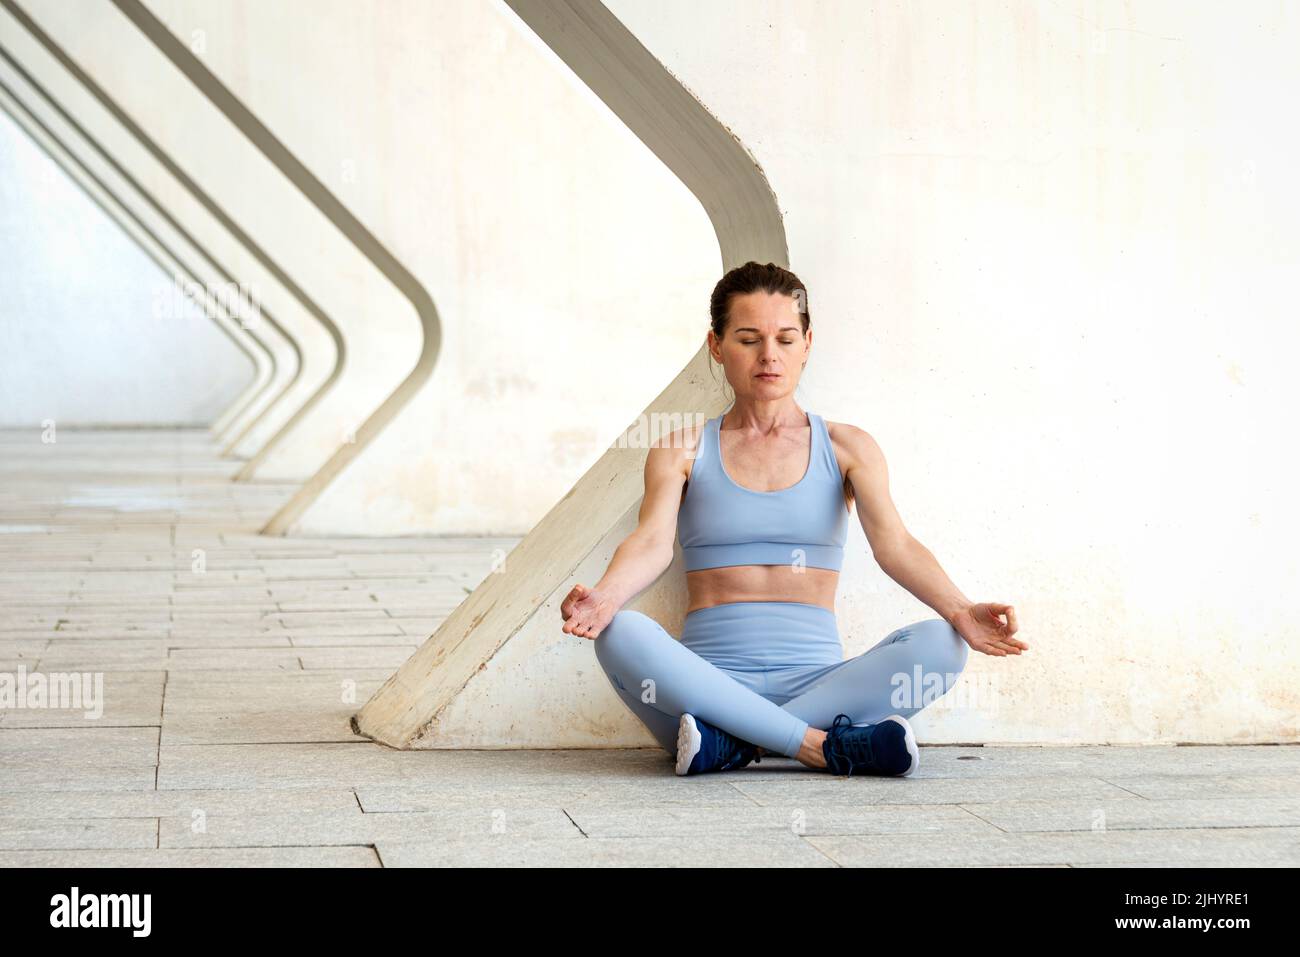 Woman sitting practicing yoga and meditating in an urban setting. Stock Photo